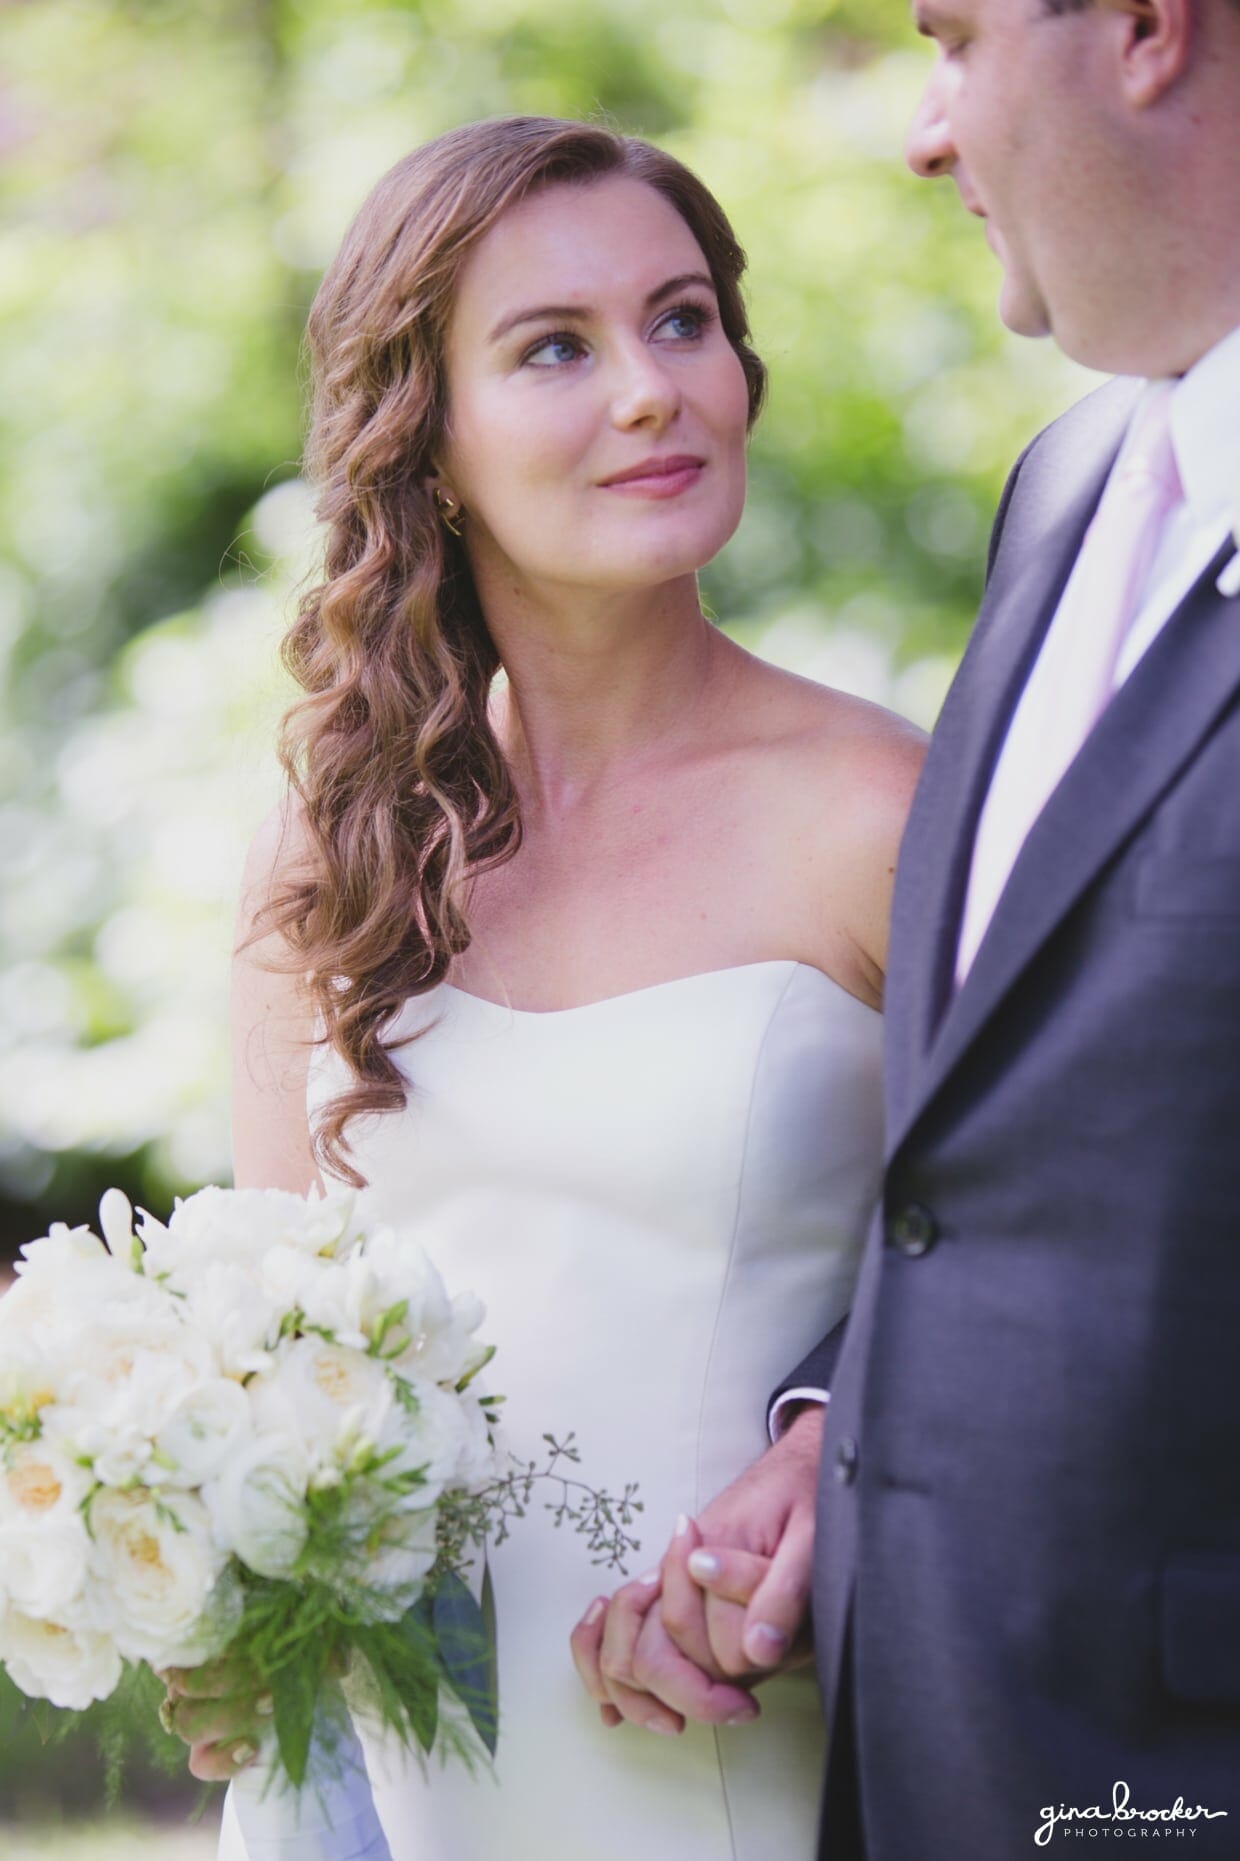 A sweet portrait of a bride looking up at her groom while holding a classic and elegant white bouquet